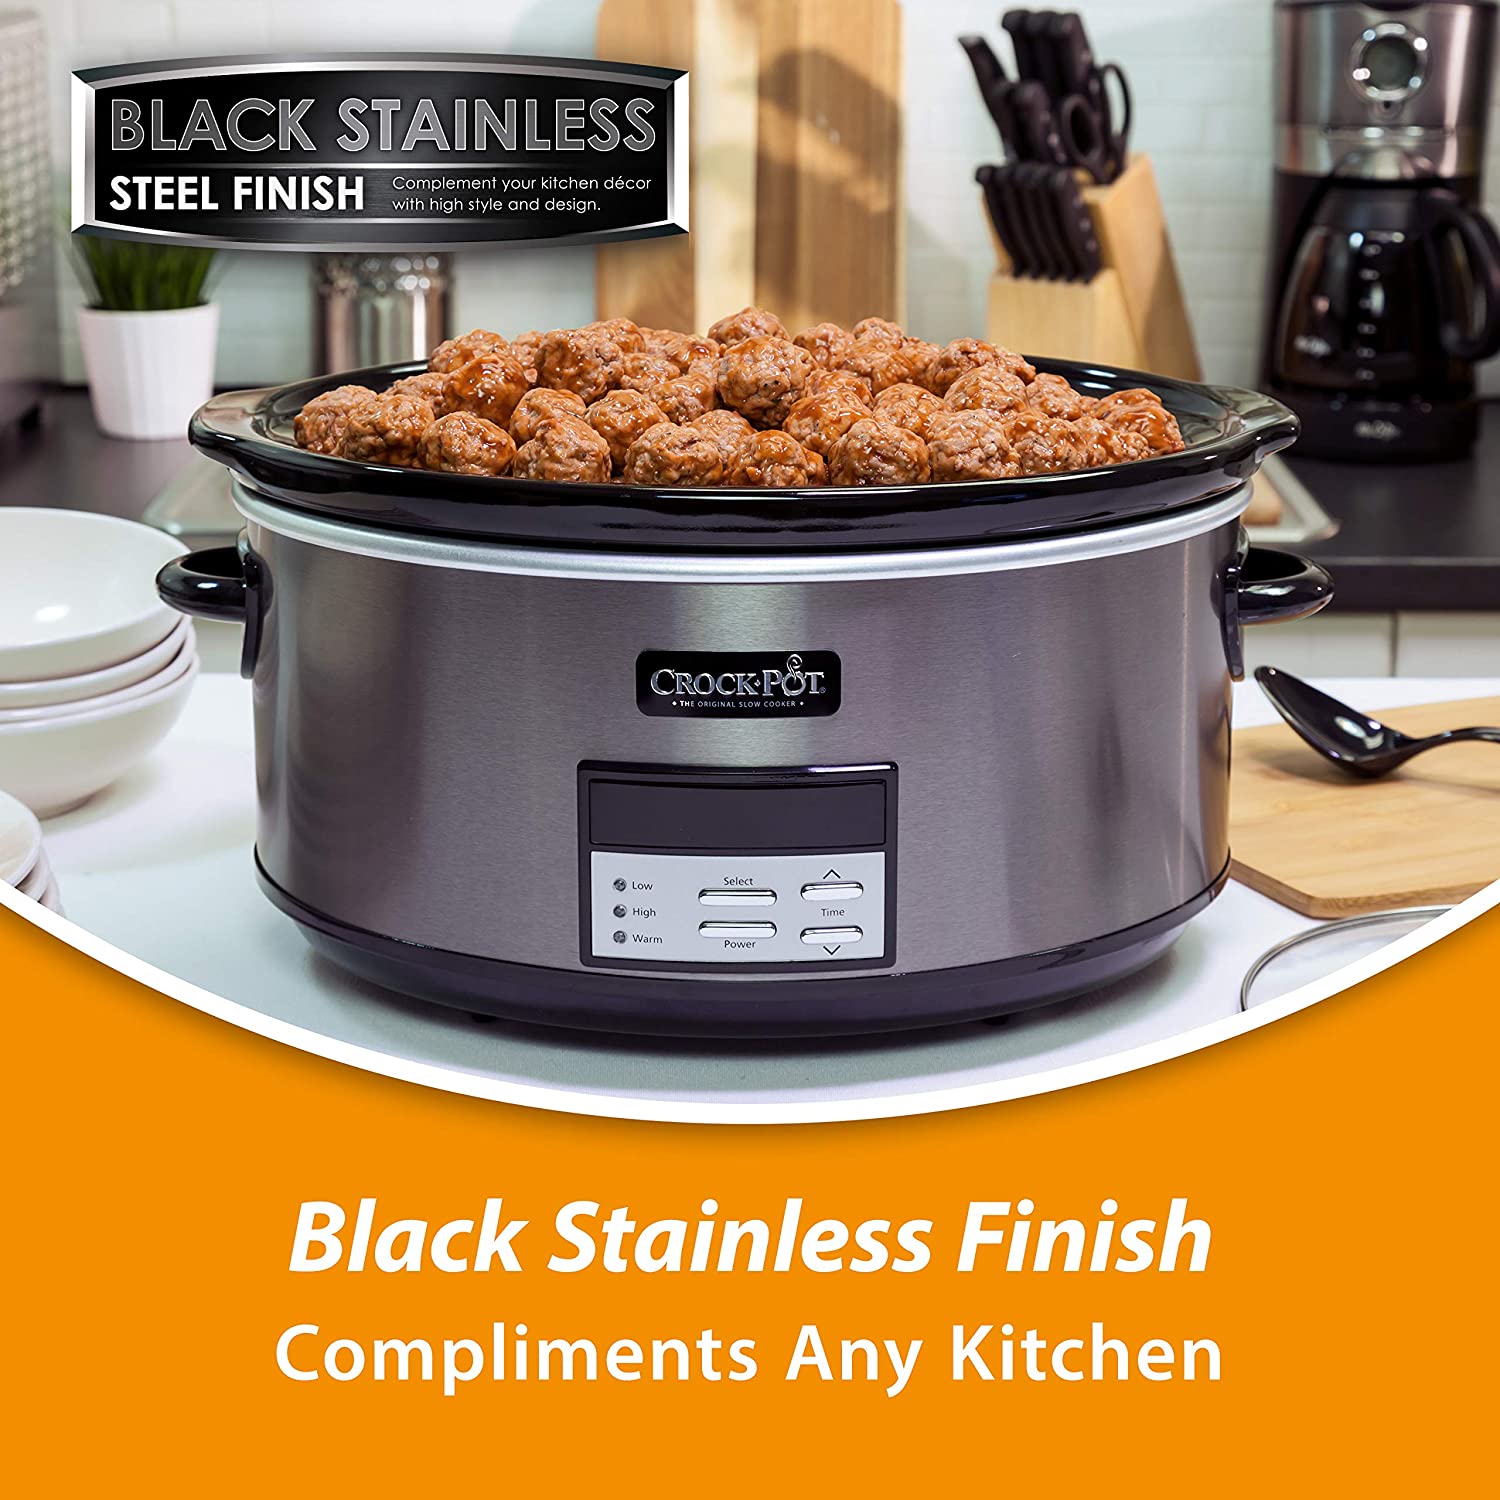 Crock-Pot 8 Quart Slow Cooker with Auto Warm Setting and Cookbook, Black  Stainless Steel